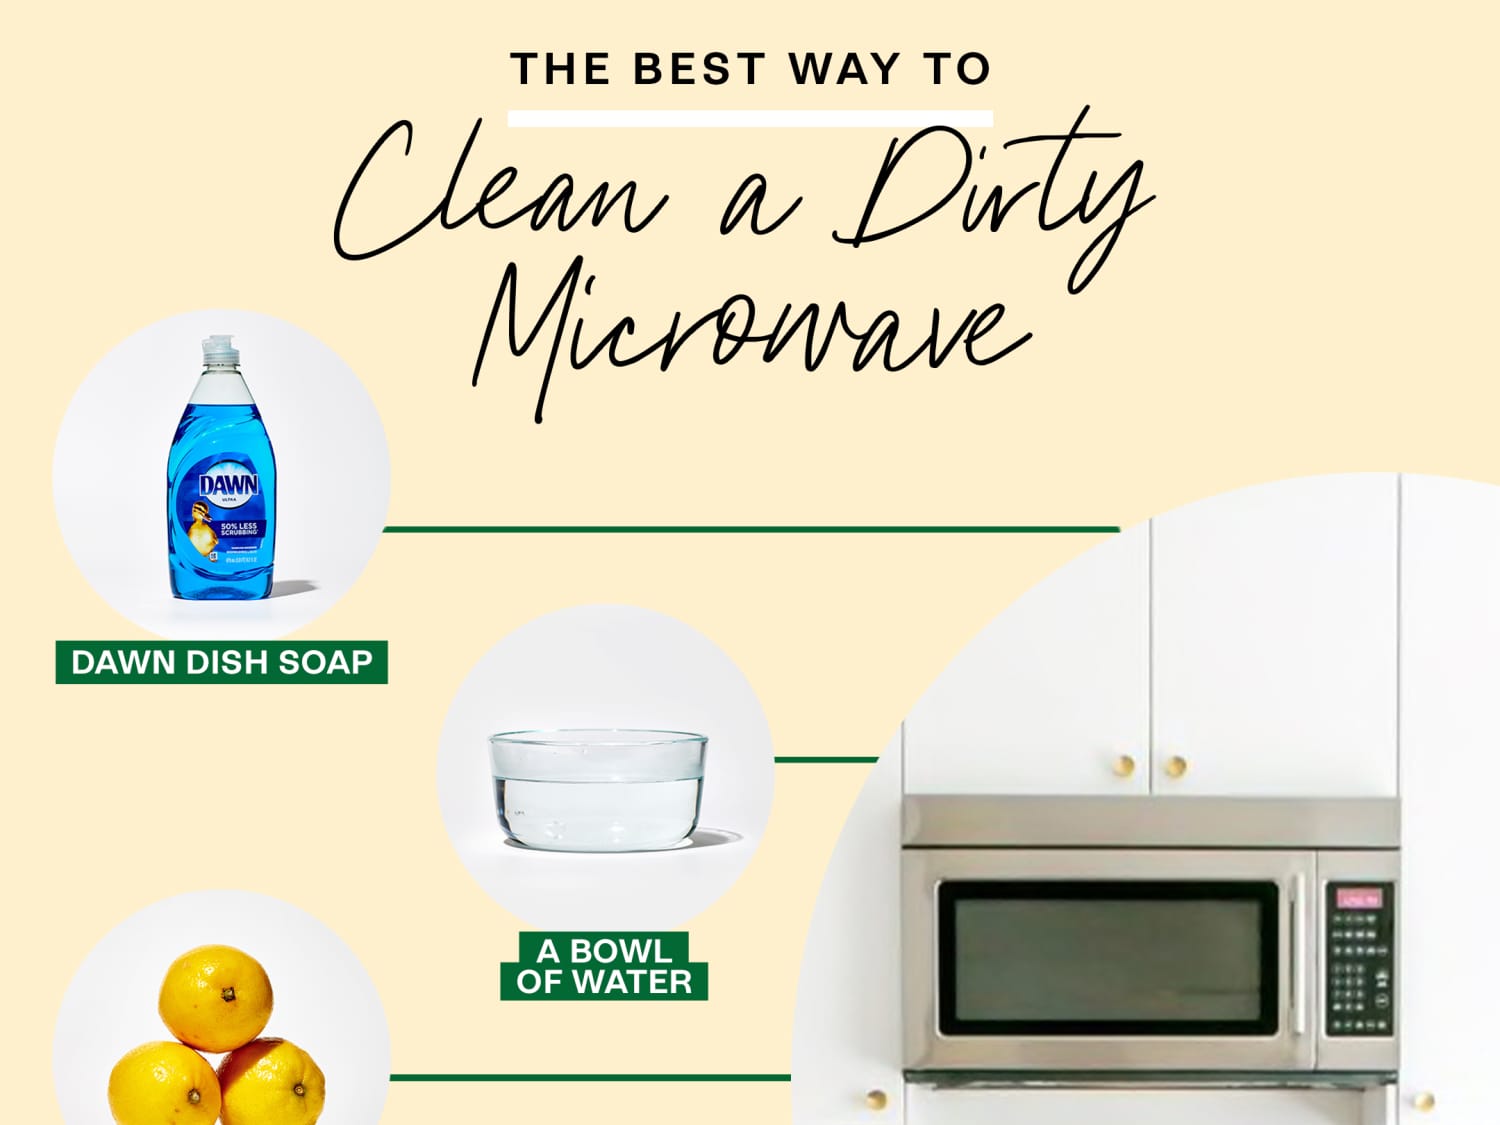 https://cdn.apartmenttherapy.info/image/upload/f_jpg,q_auto:eco,c_fill,g_auto,w_1500,ar_4:3/k%2FPhoto%2FLifestyle%2FCleaning-Showdown_Microwave%2FCleaningShowdown-dirty-microwave-updated